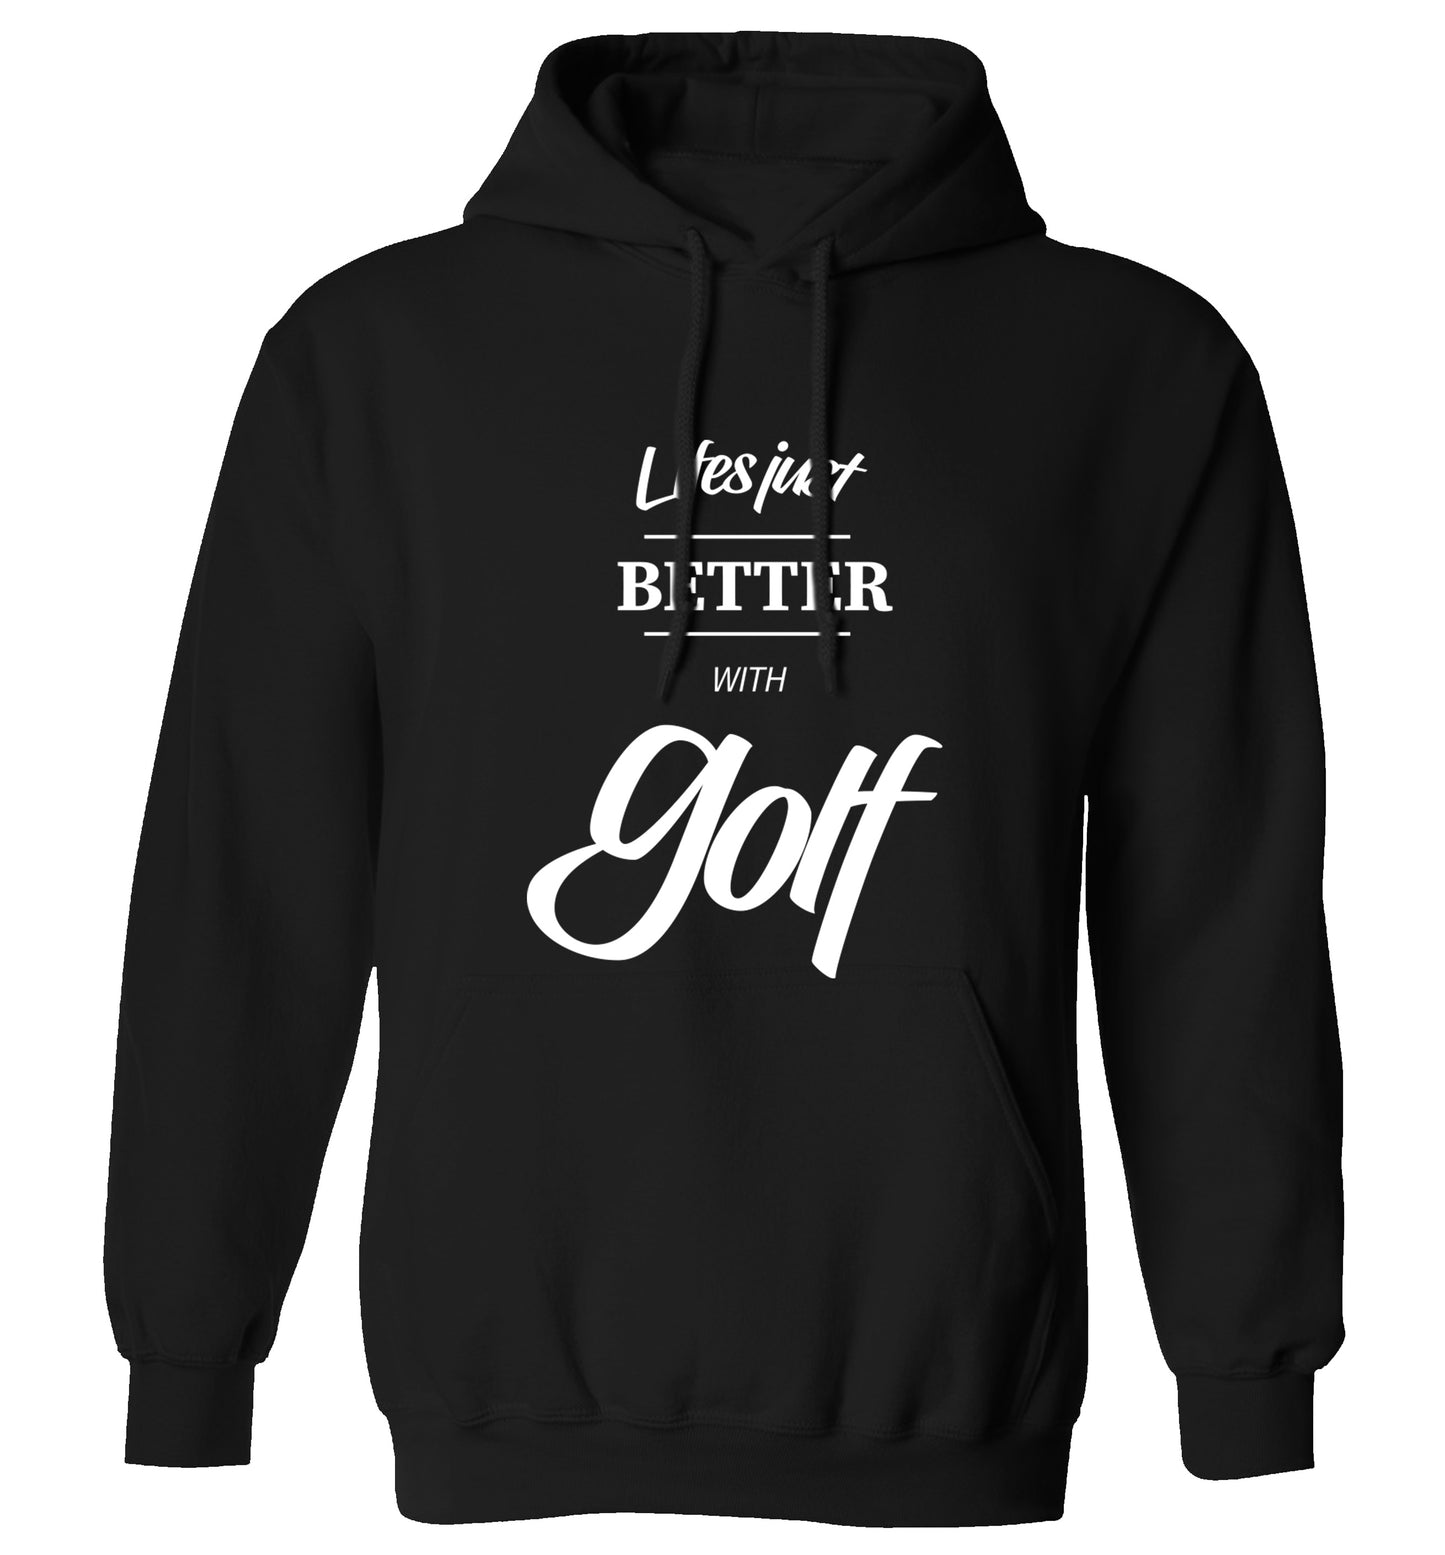 Life is better with golf adults unisex black hoodie 2XL